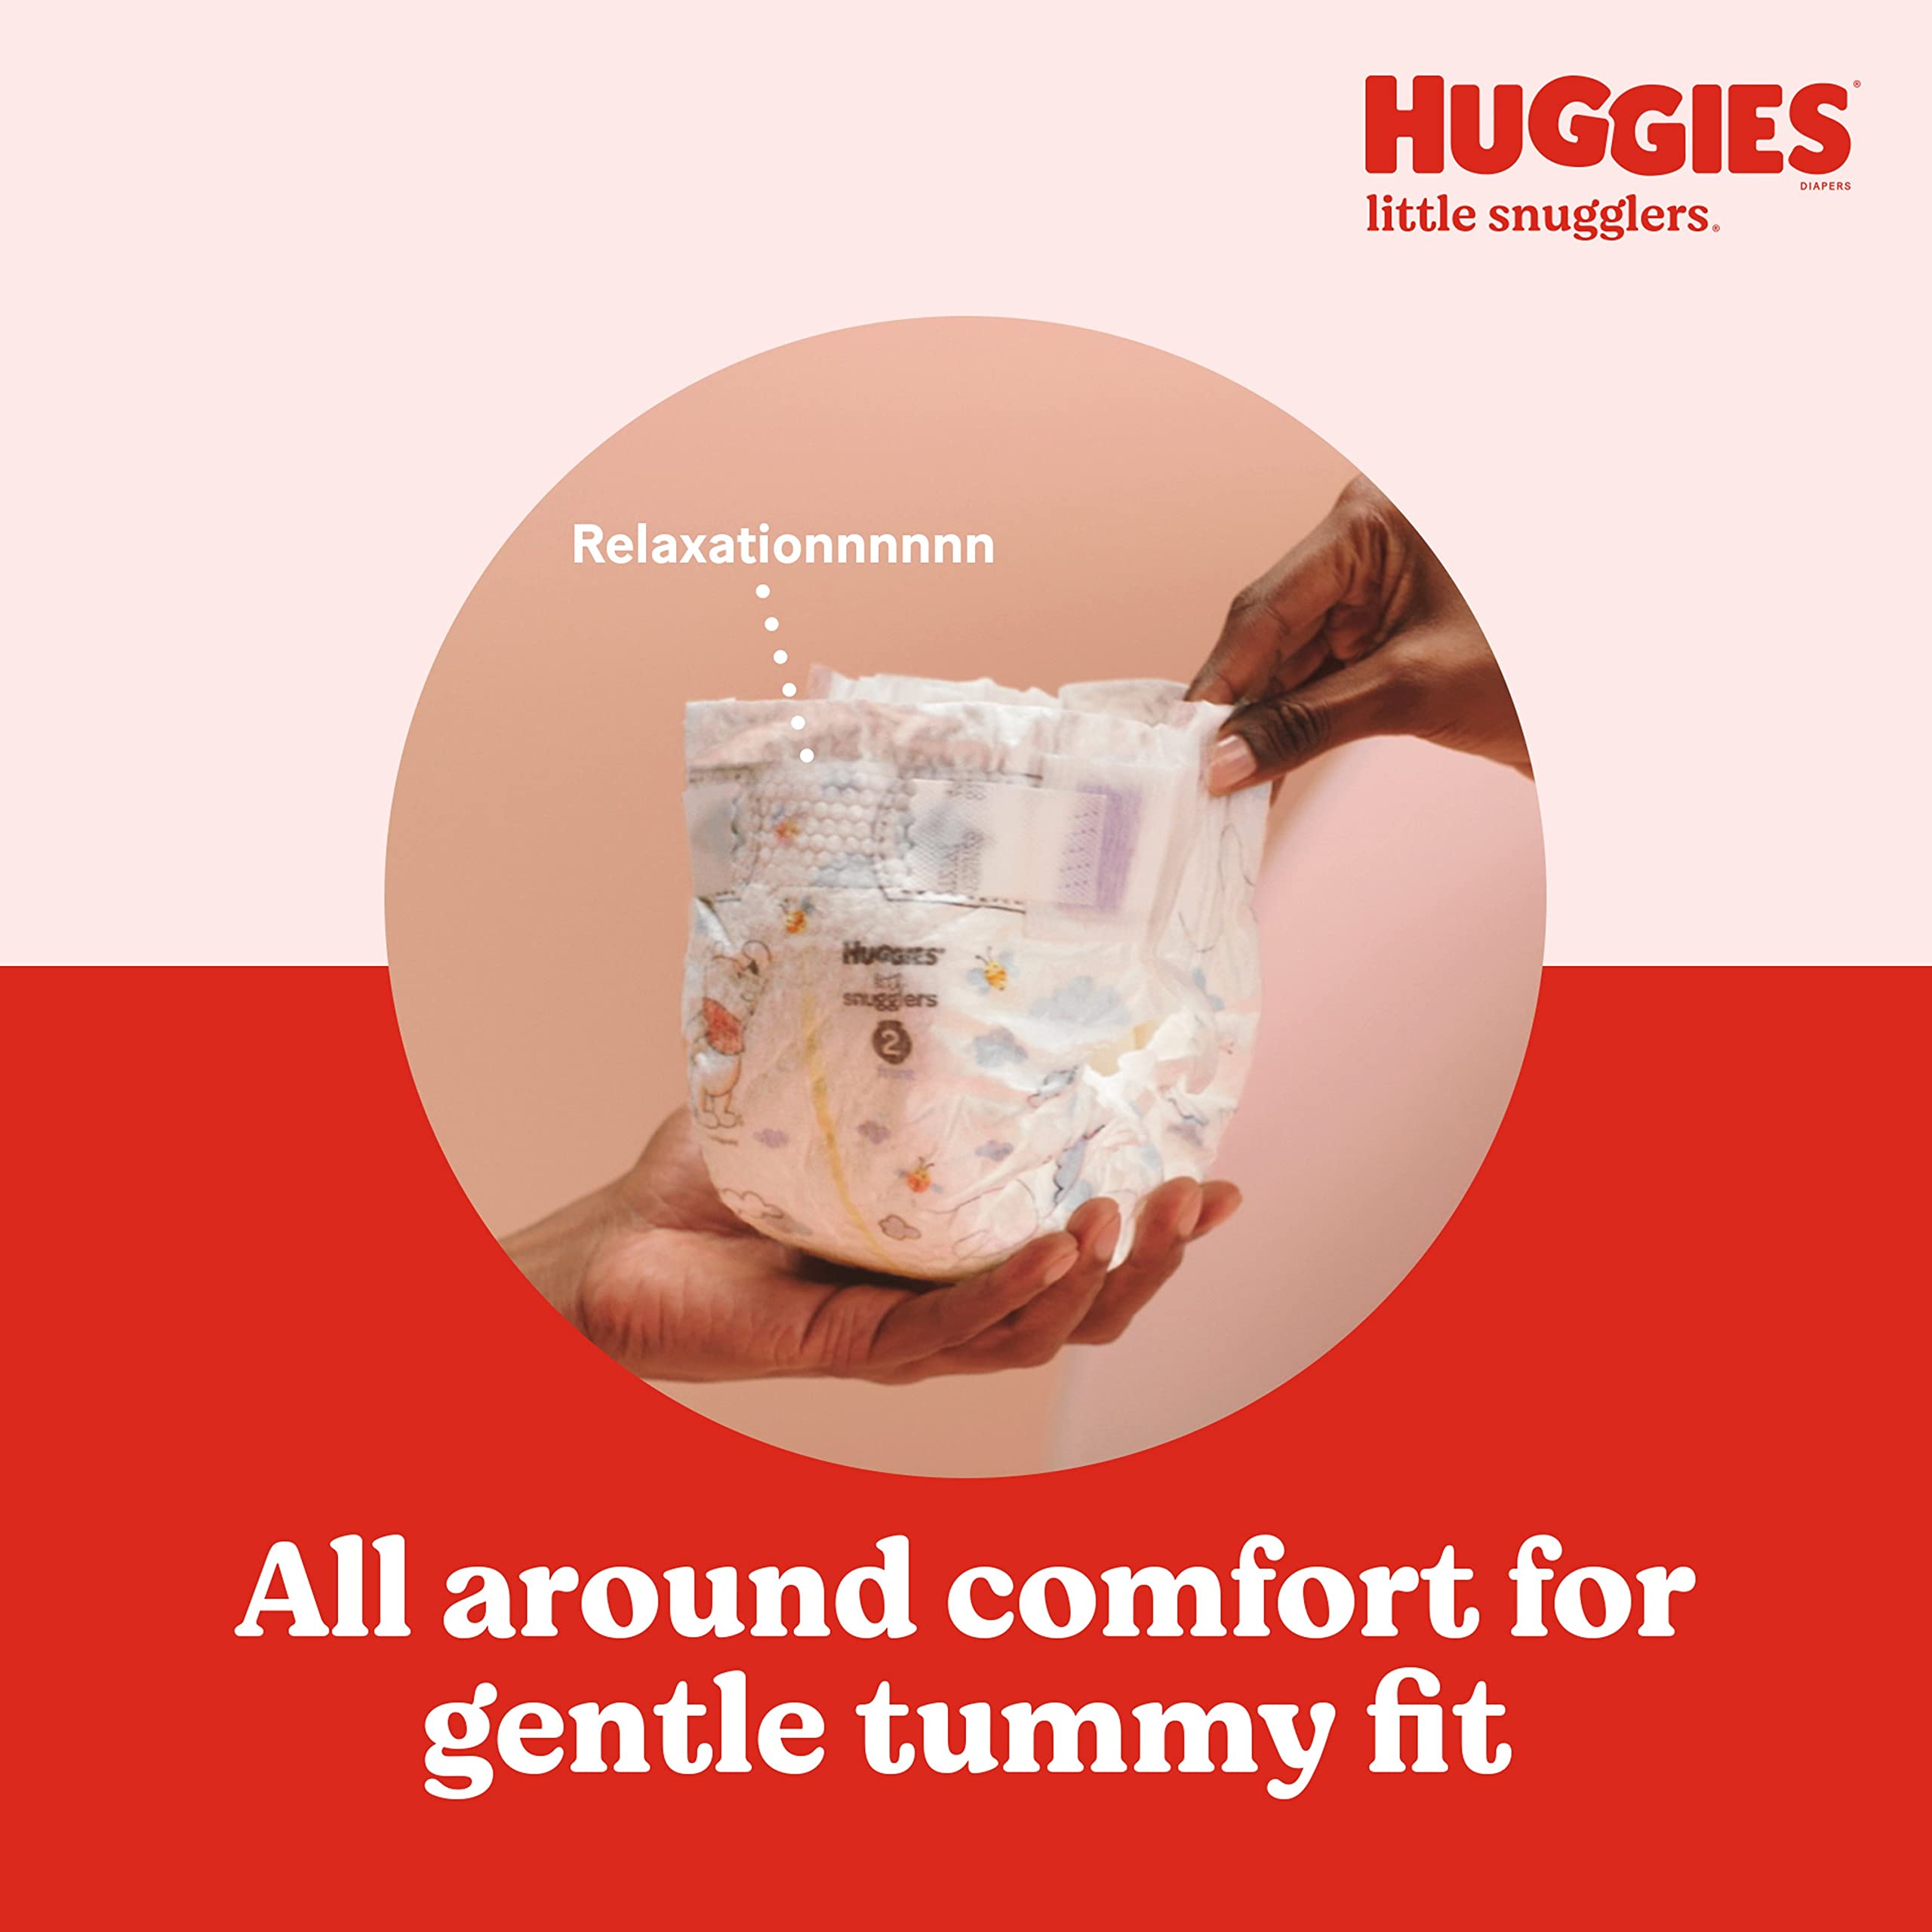 Huggies Bundle - Little Snugglers Baby Diapers, Size 1, 198 Ct, One Month Supply & Natural Care Sensitive Baby Wipes, Unscented, 12 Flip-Top Packs (768 Wipes Total)